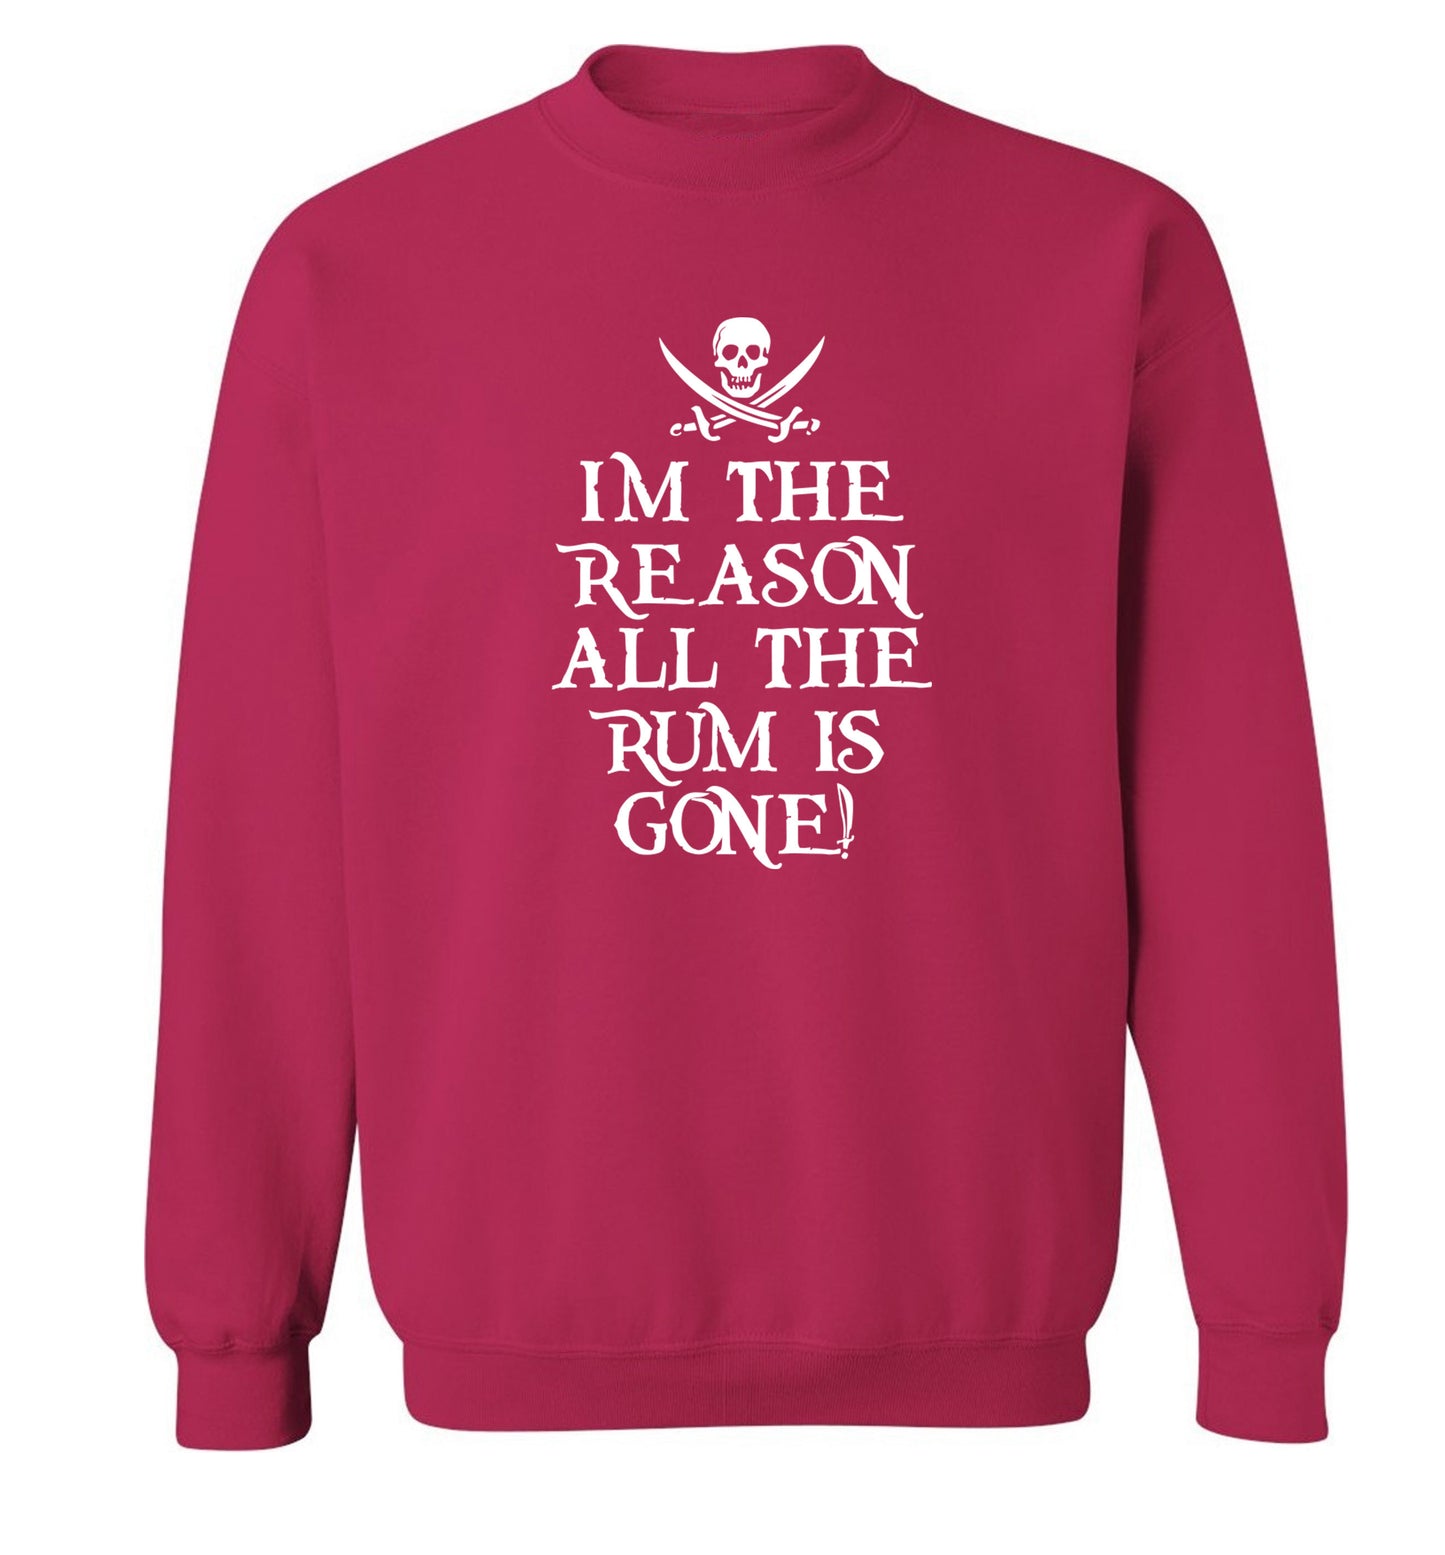 Why is the rum always gone? Adult's unisex pink Sweater 2XL